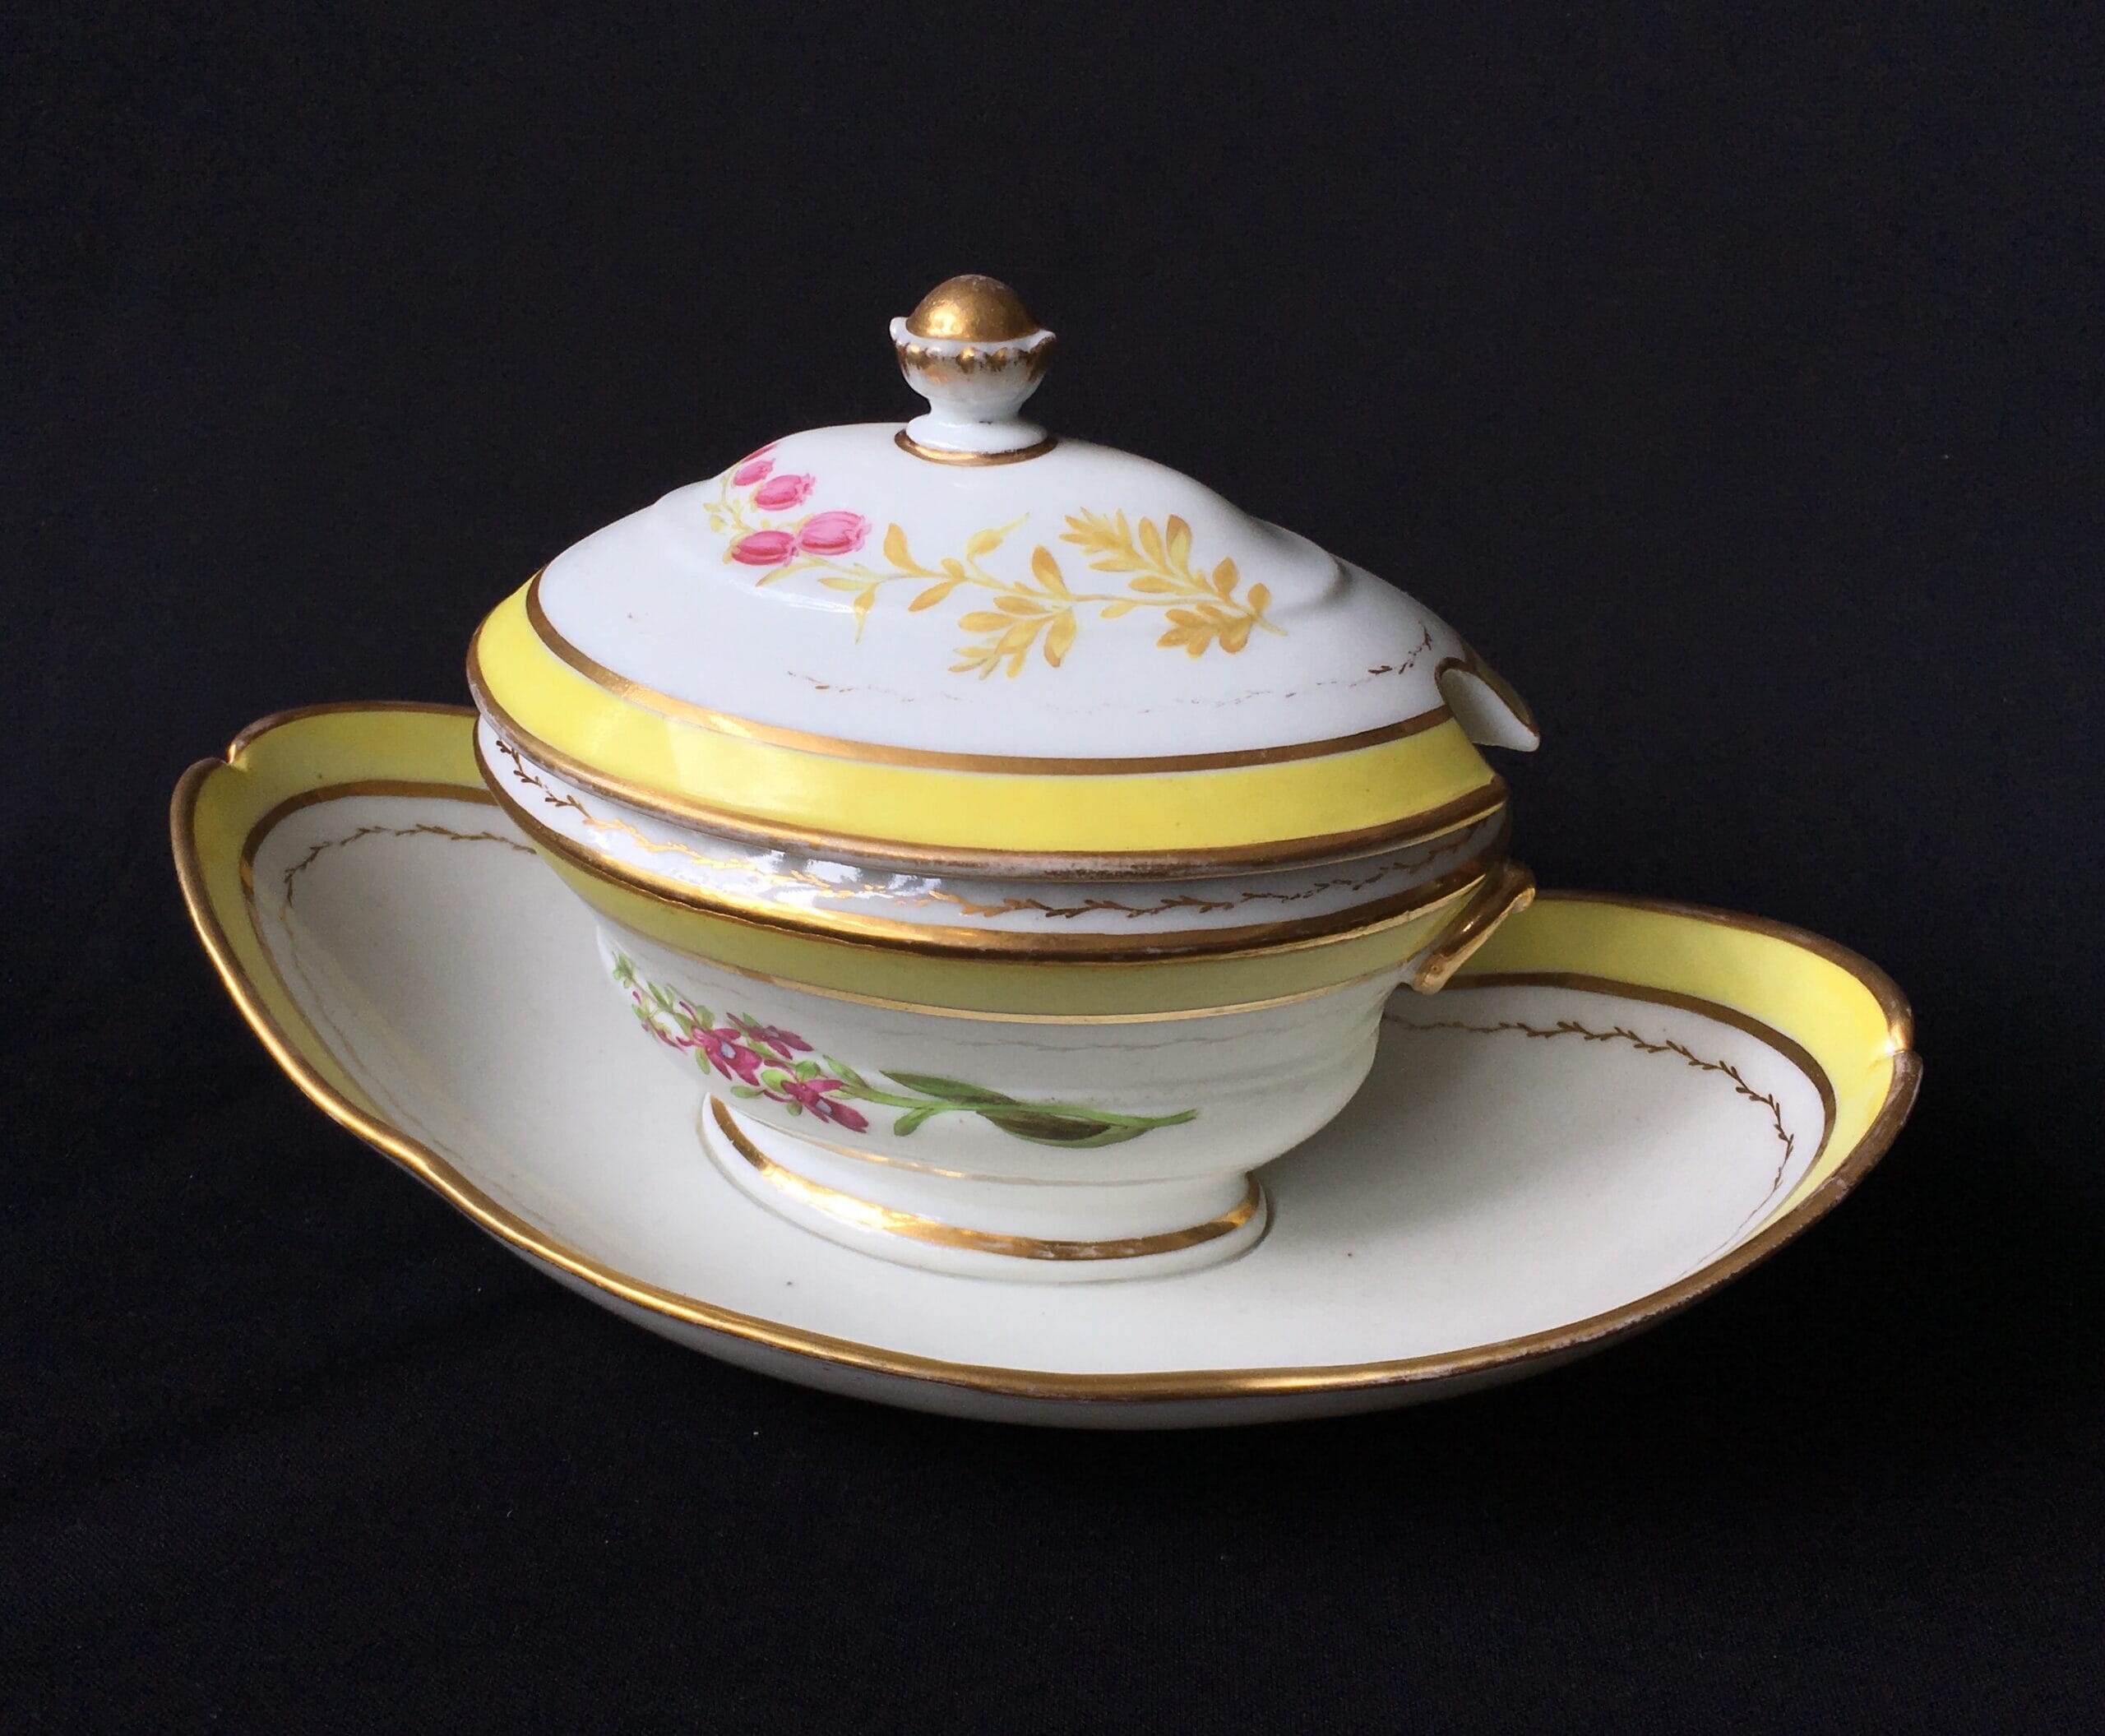 French porcelain tureen, decorated by Billingsly at Brampton, c. 1805 -0